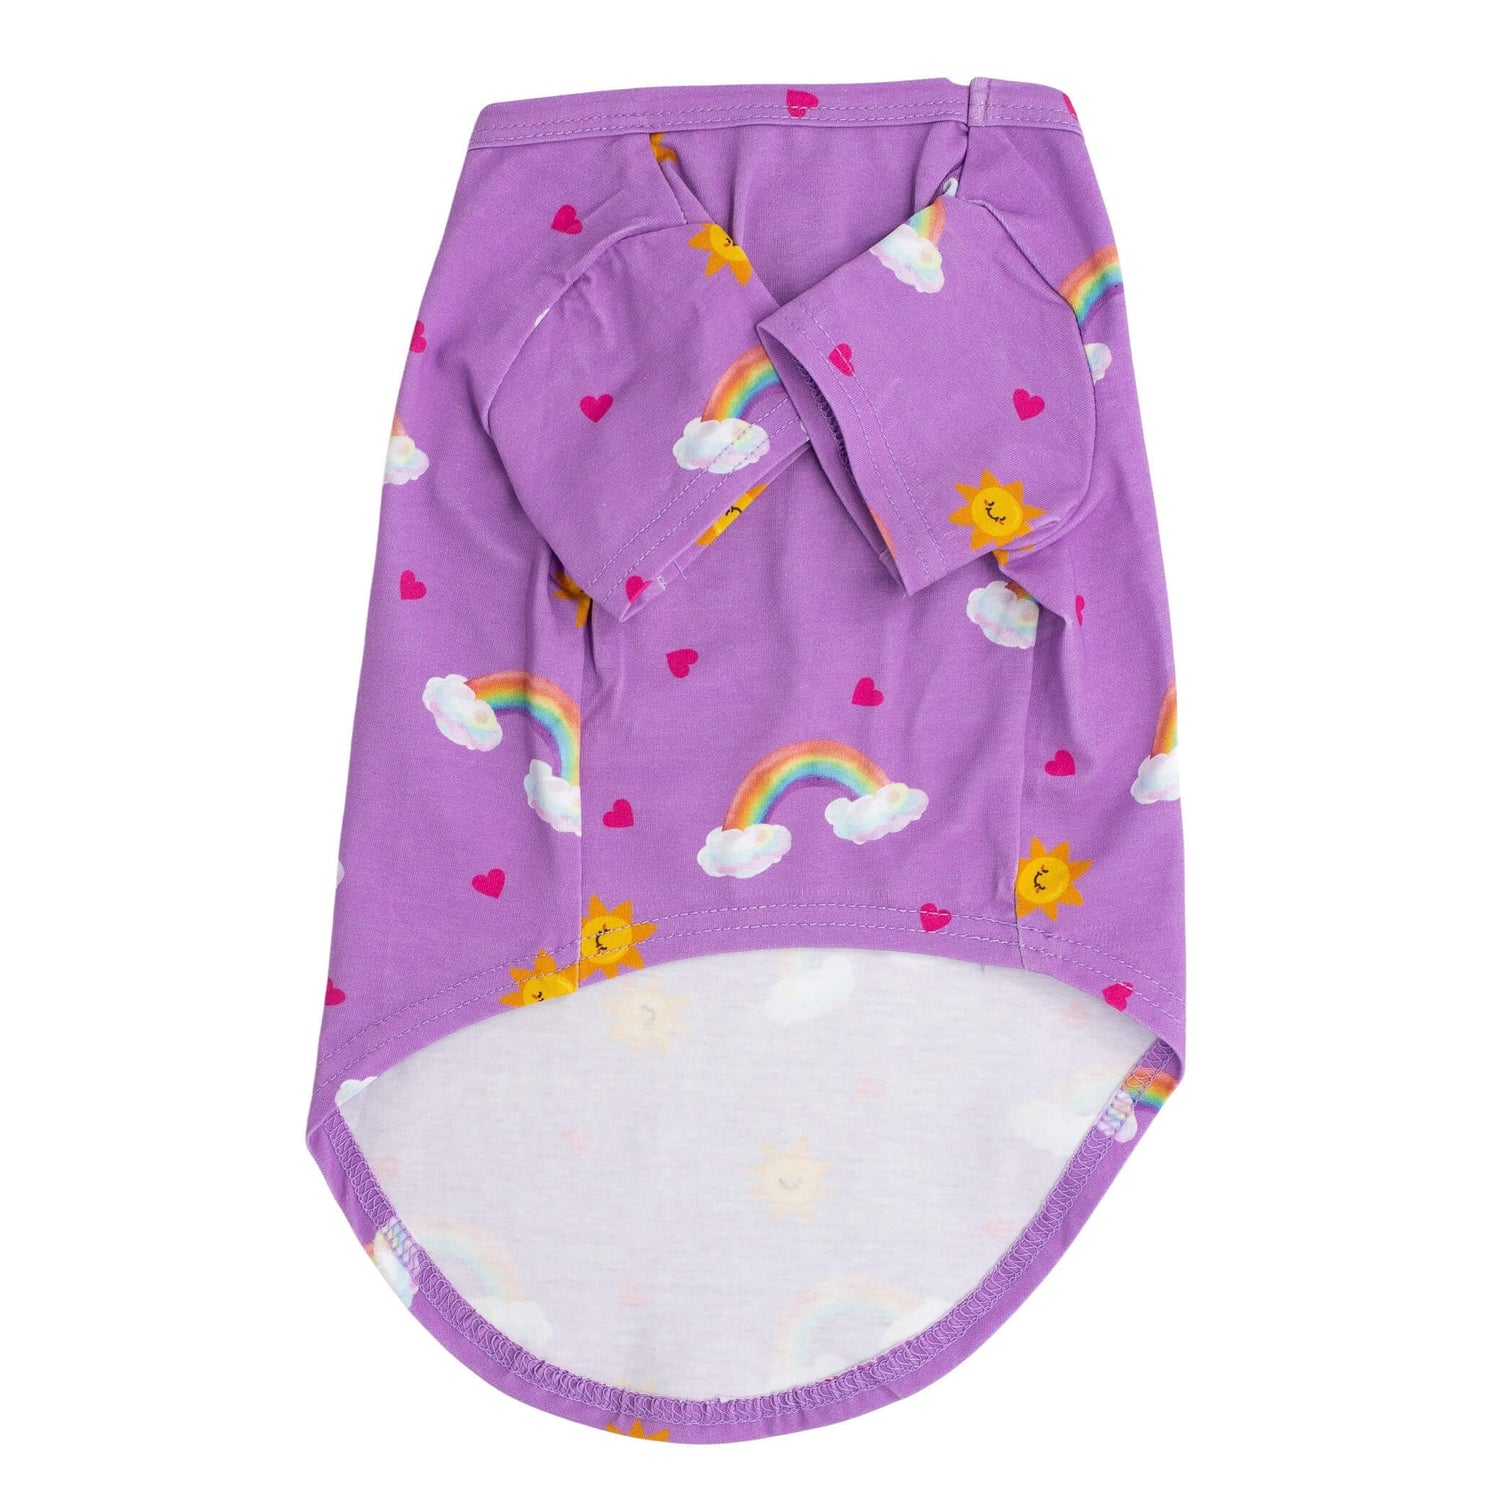 Front flat lay of Vibrant Hound's Chasing Rainbow pyjama for dogs. The dog PJs are purple with rainbows, bright suns,  and love hearts printed on it. 